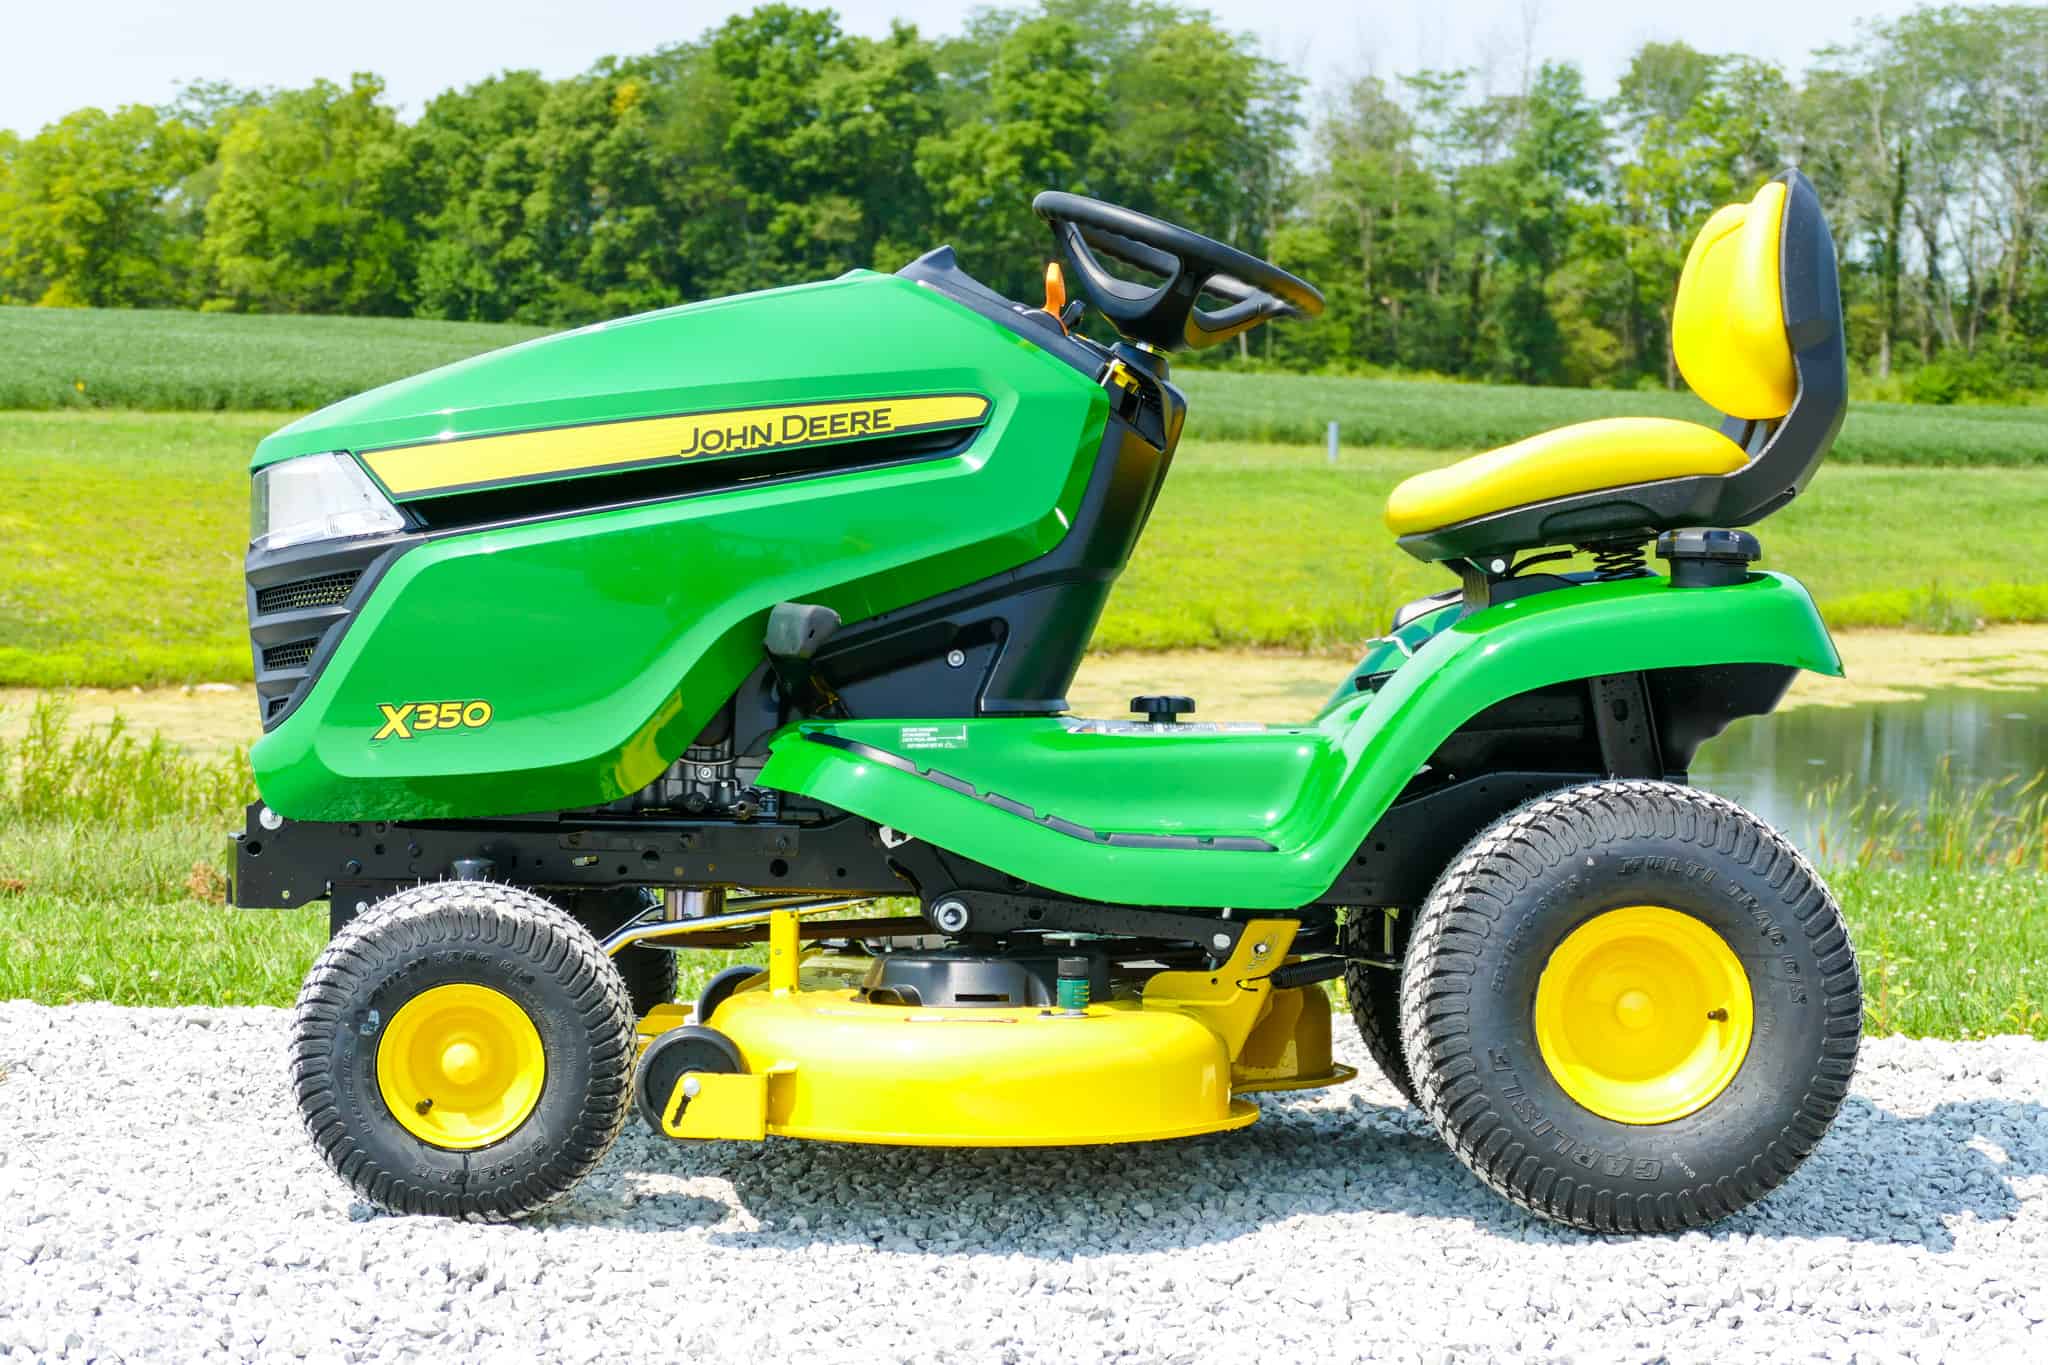 John Deere X350 Lawn Tractor Review And Specs